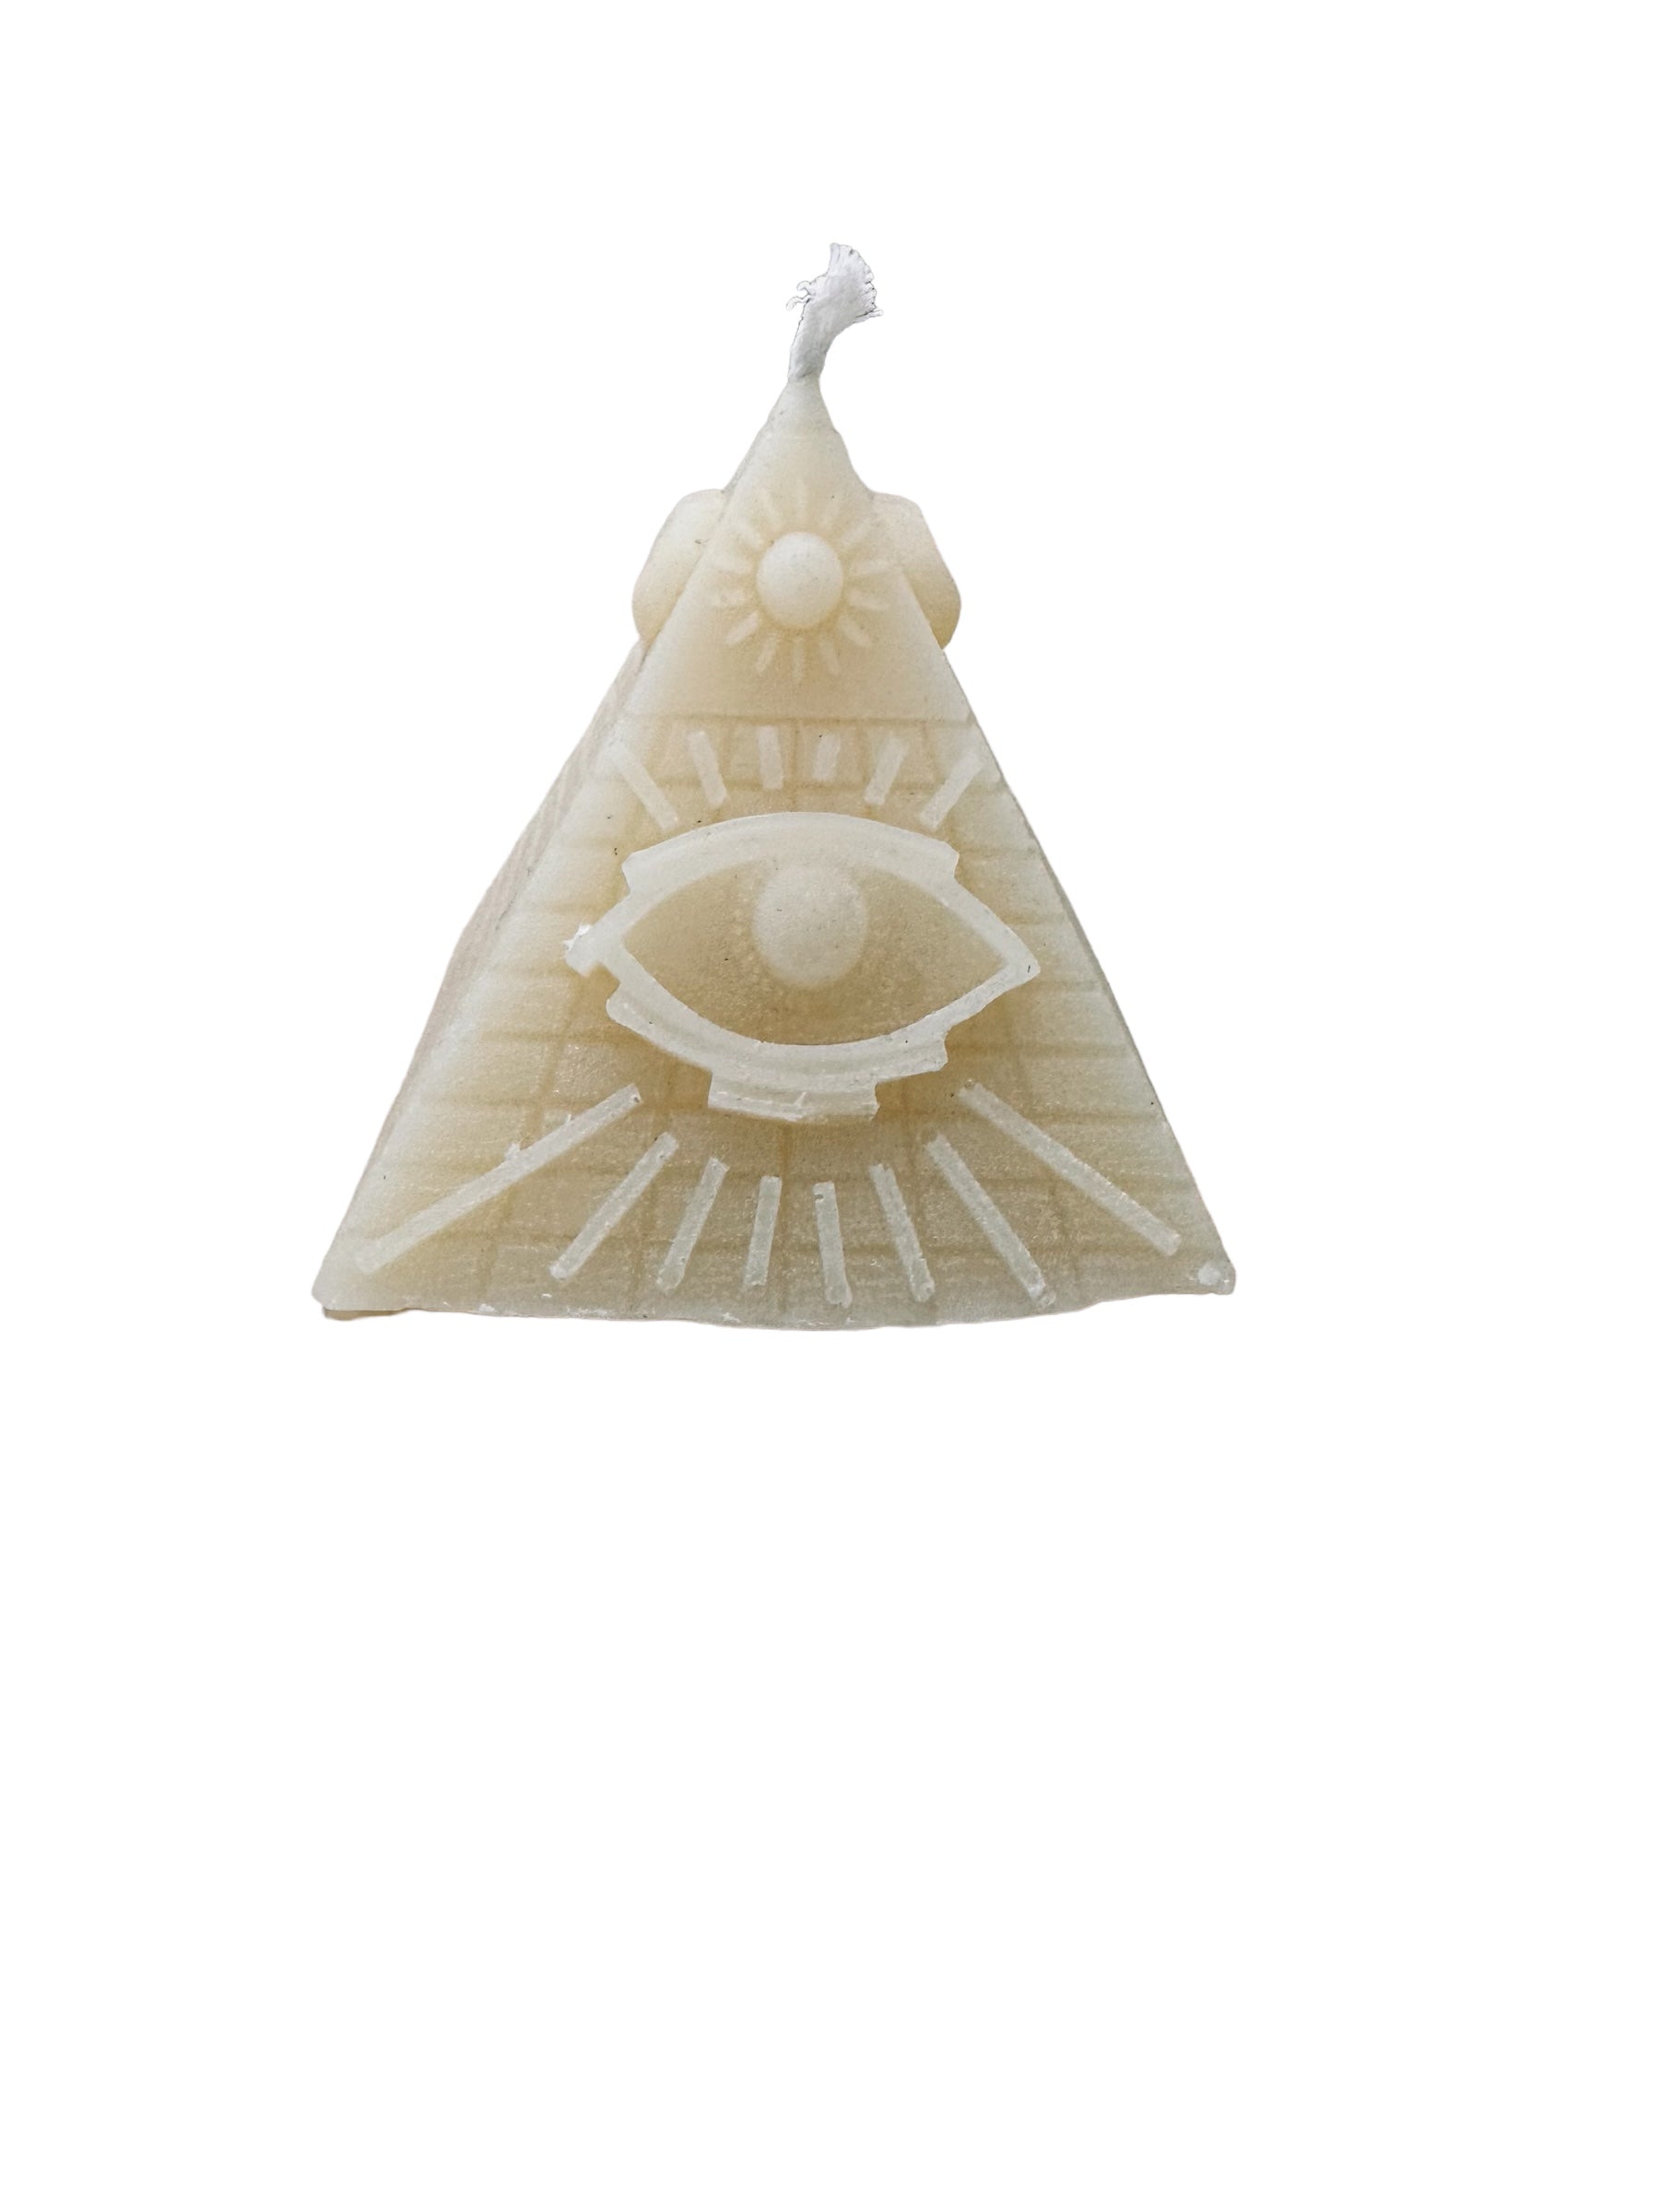 Beeswax - All Seeing Eye Pyramid Candle